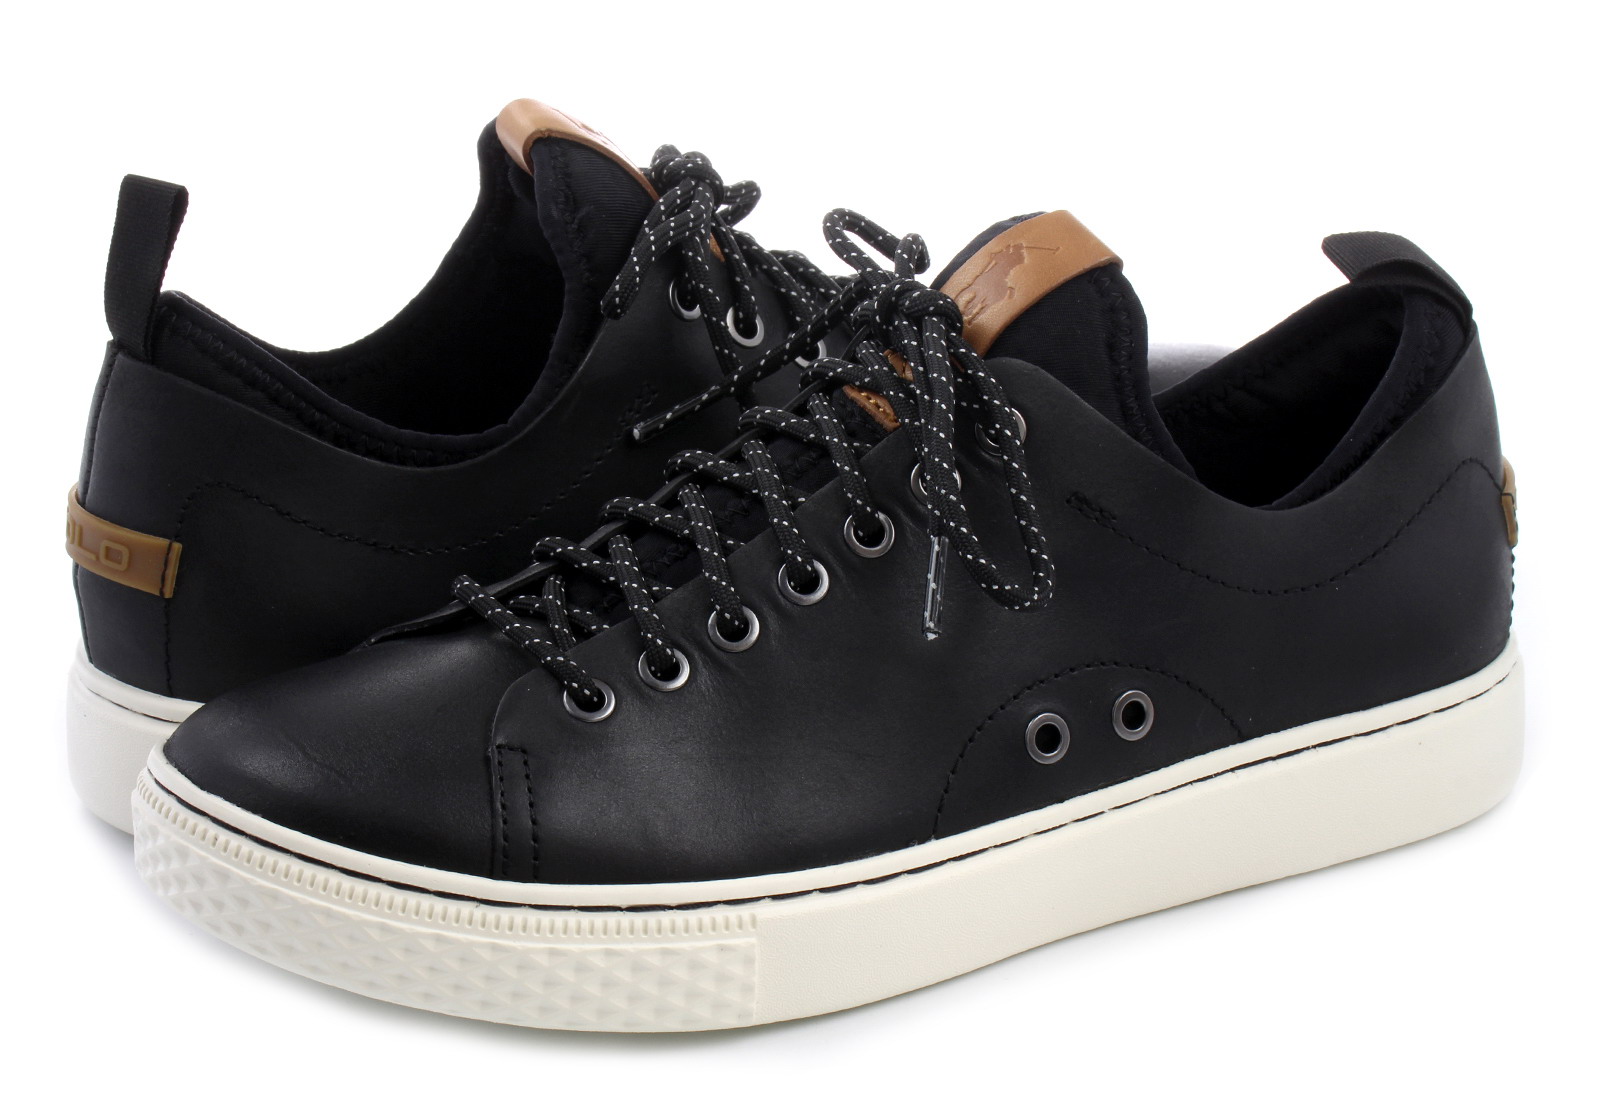 Polo Ralph Lauren Sneakers - Dunovin - 816713105004 - Office Shoes Romania